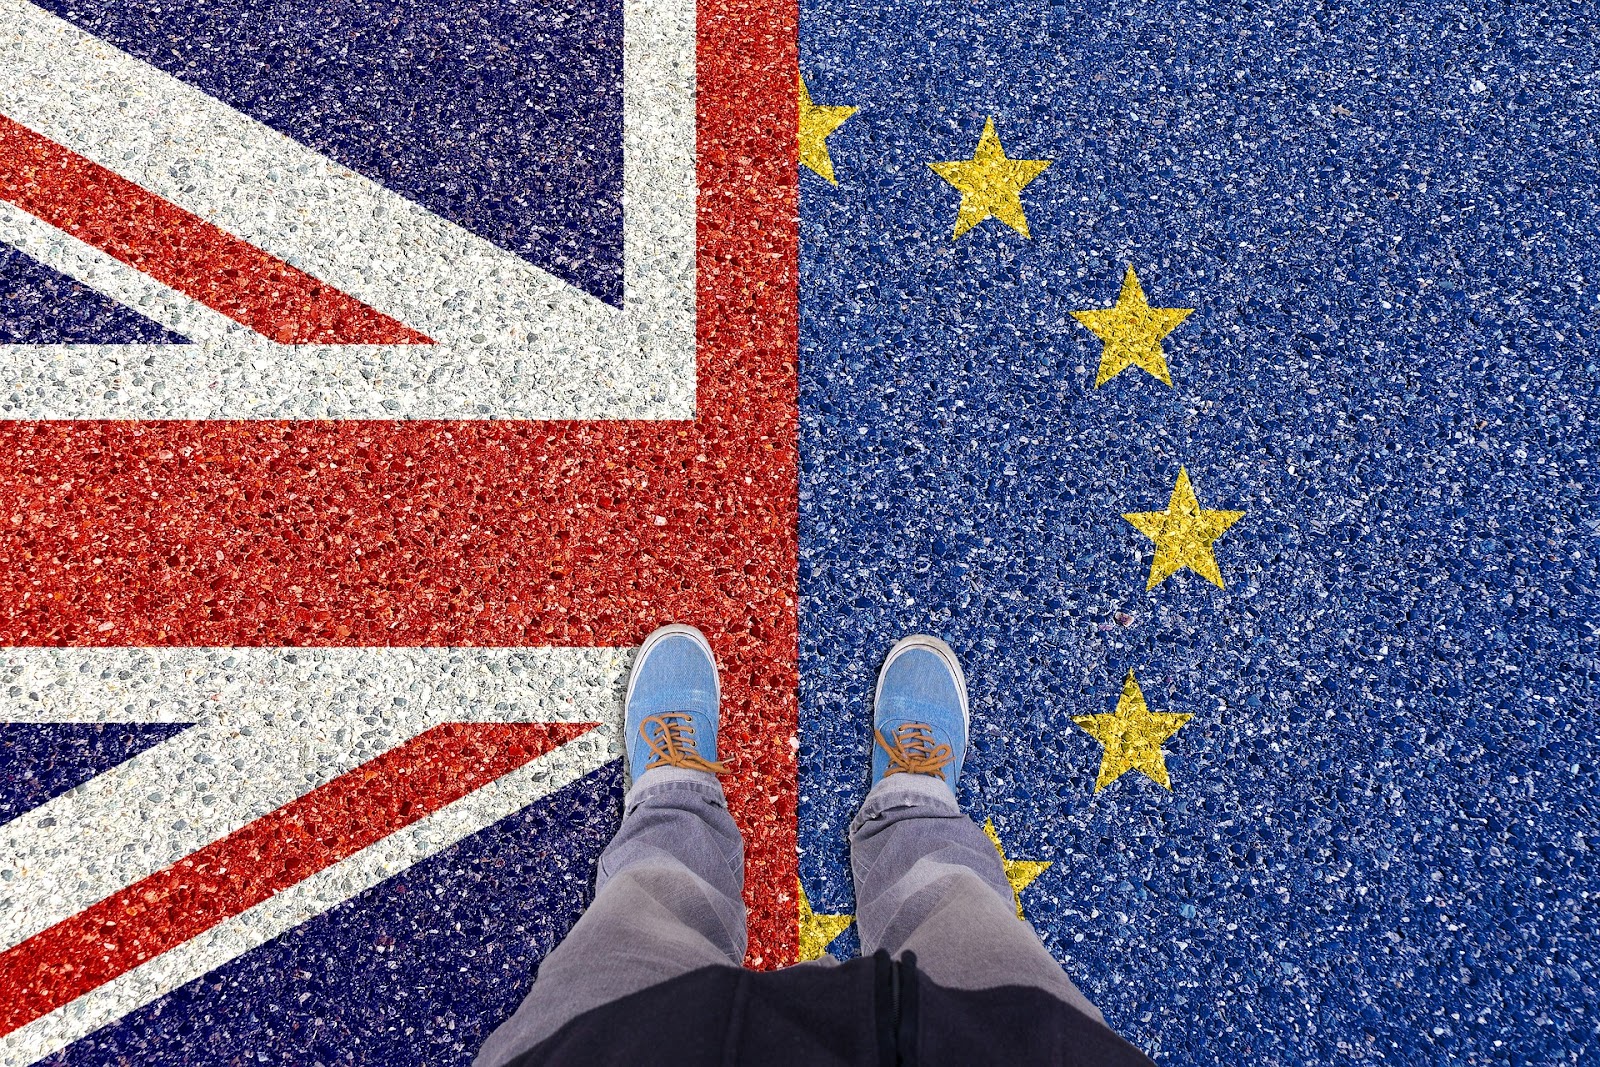 Running Your Business During Brexit Uncertainty